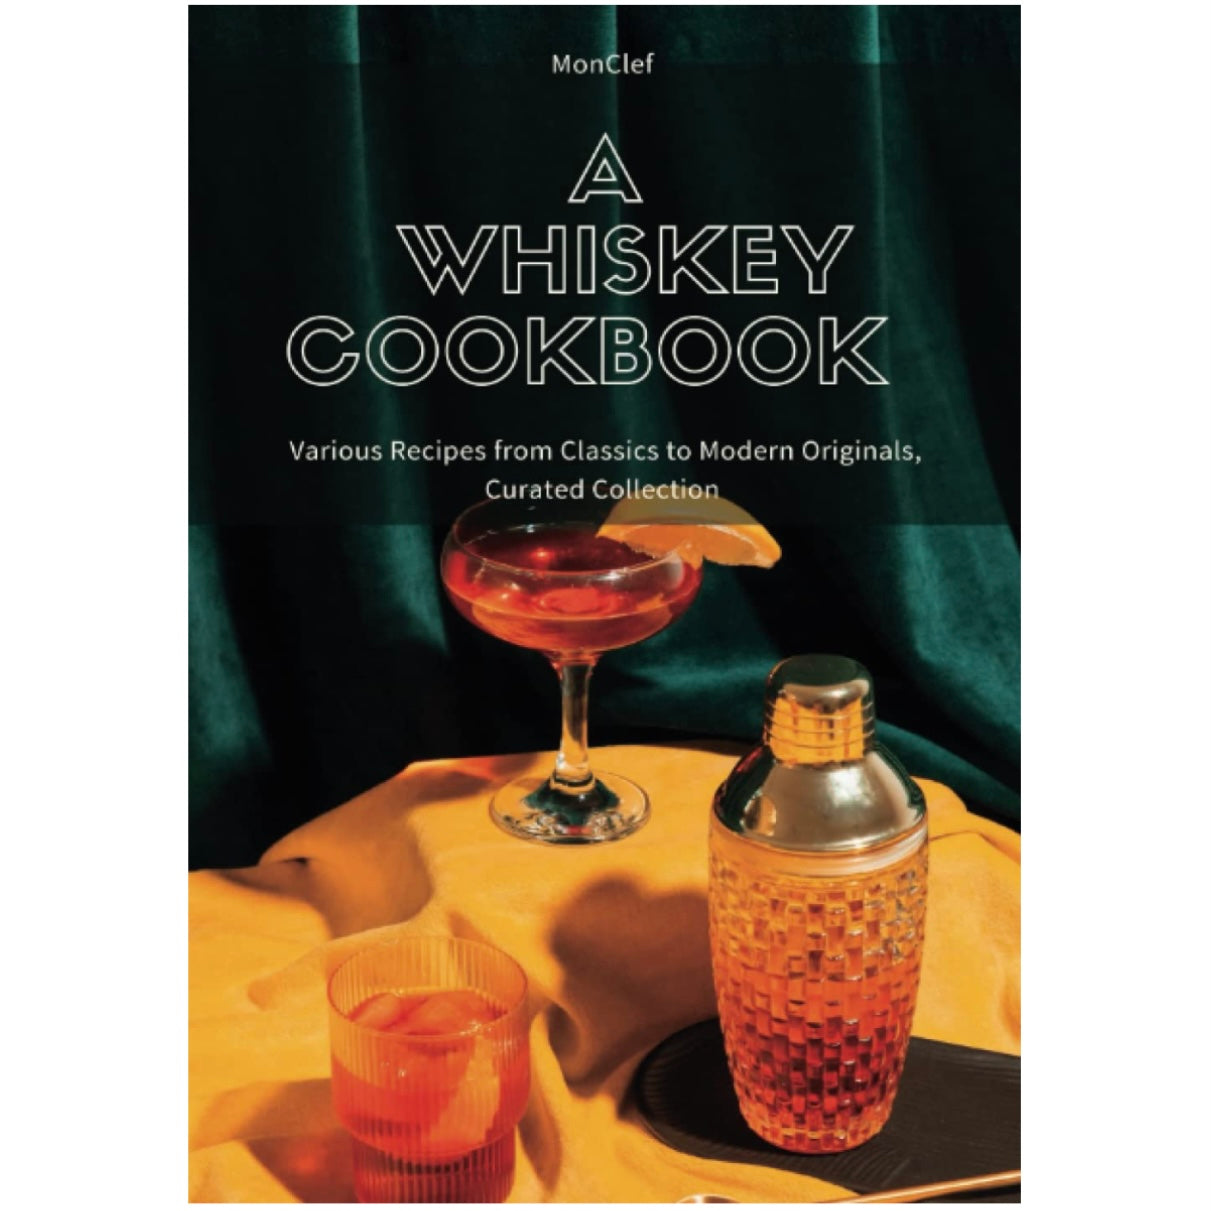 A Whiskey Cookbook